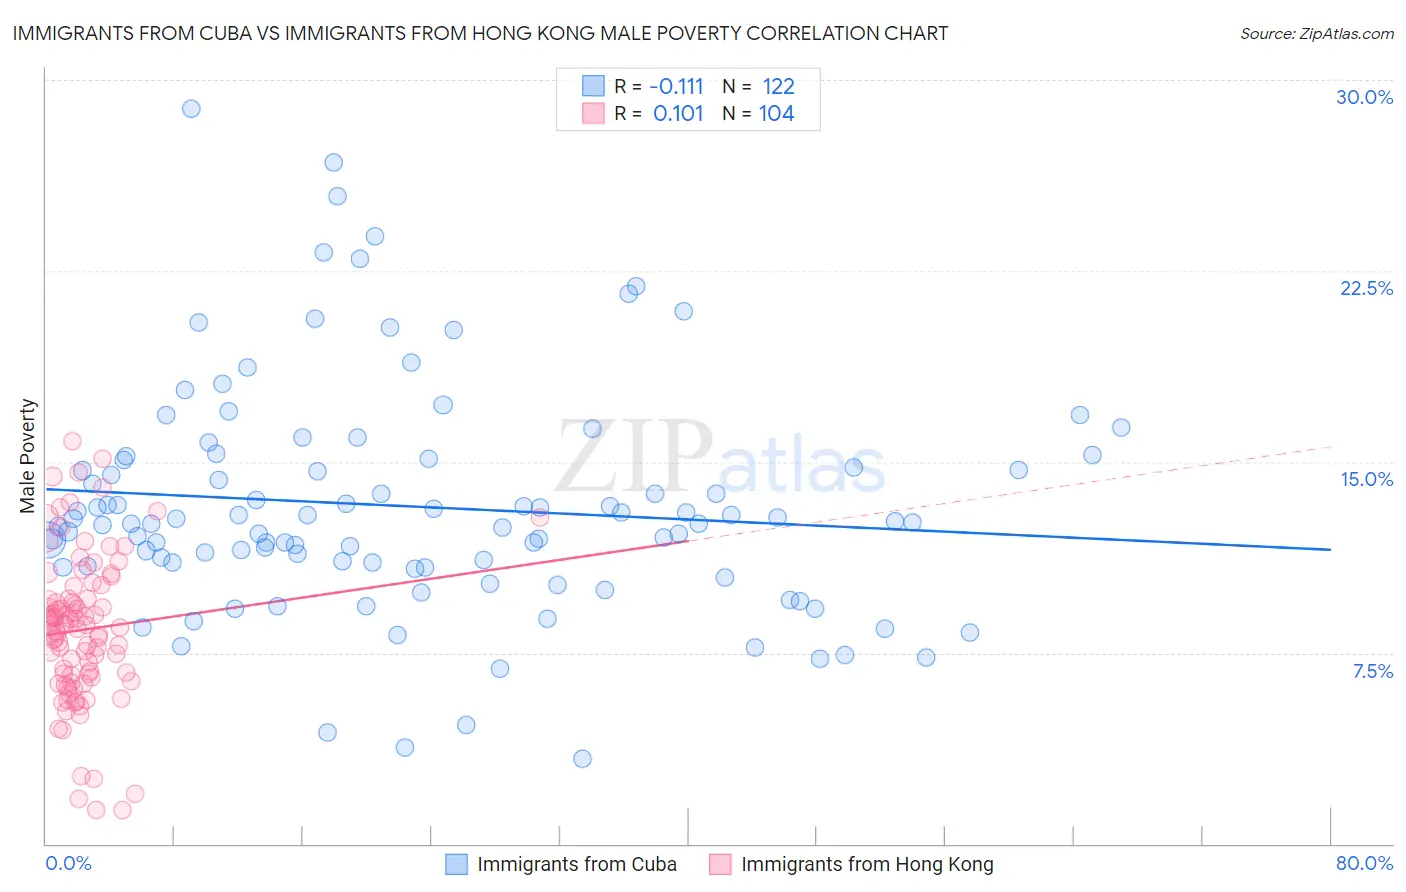 Immigrants from Cuba vs Immigrants from Hong Kong Male Poverty